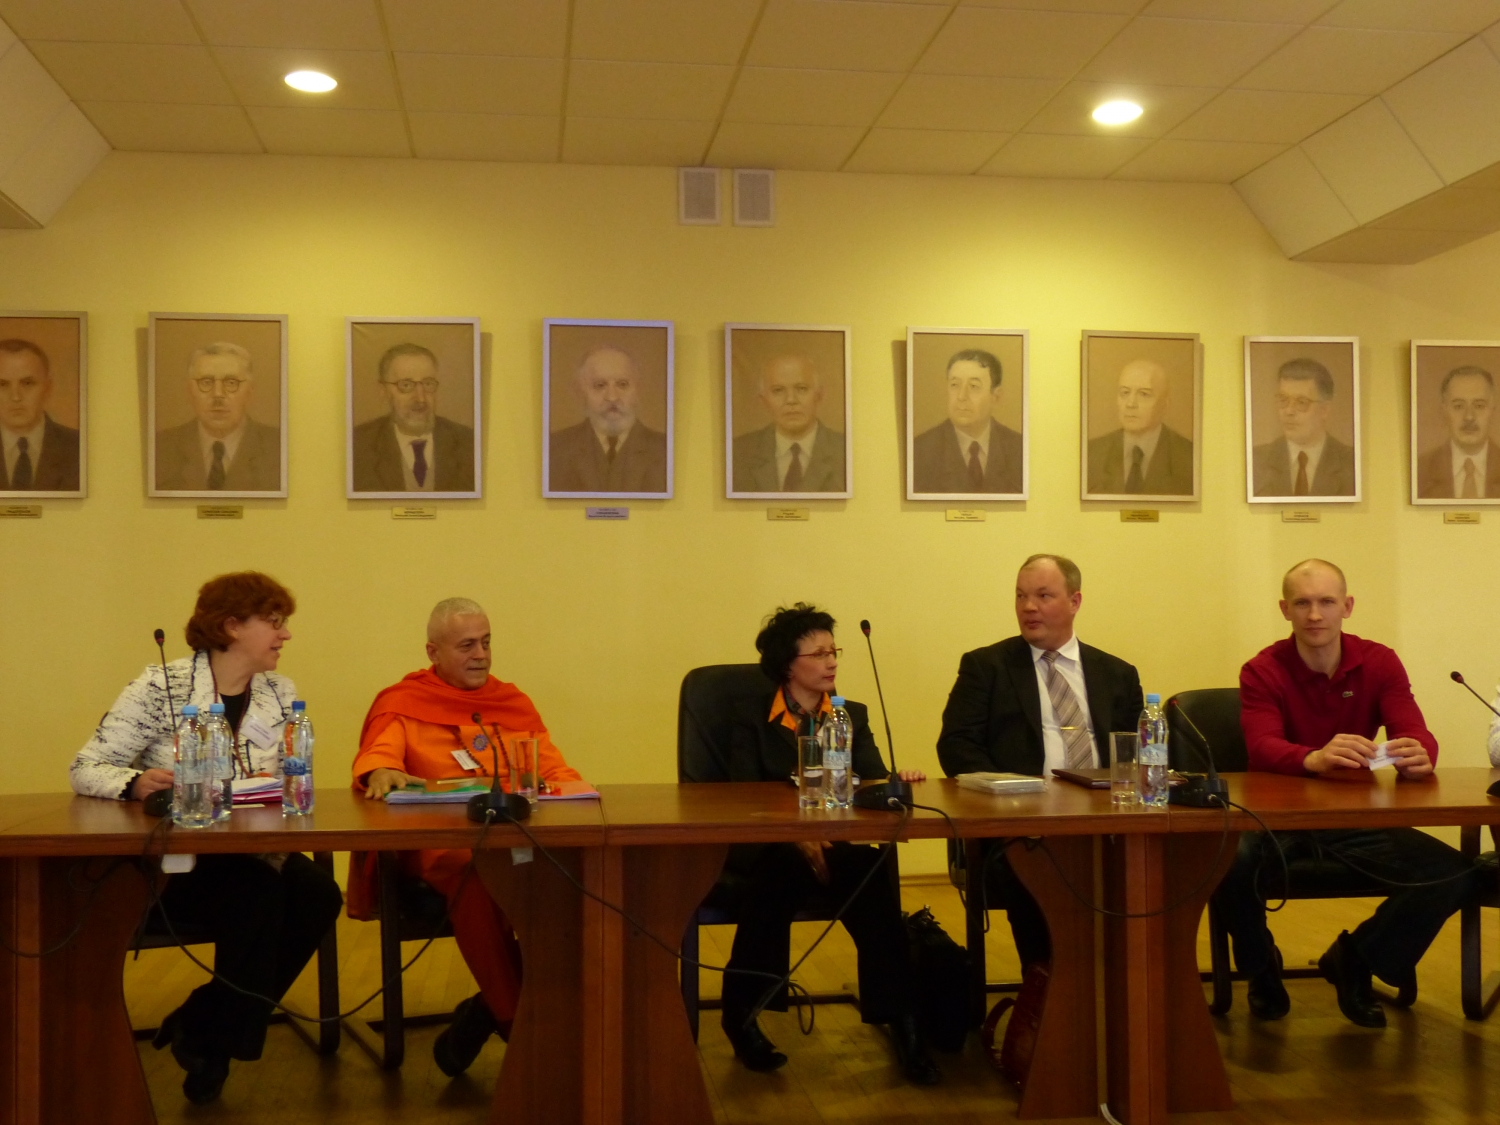 Meeting of H.H. Jagat Guru Amrta Sūryānanda Mahā Rāja with the Board of Direction of the Classical Yoga Federation of Russia - Moscow, Russia - 2013, April